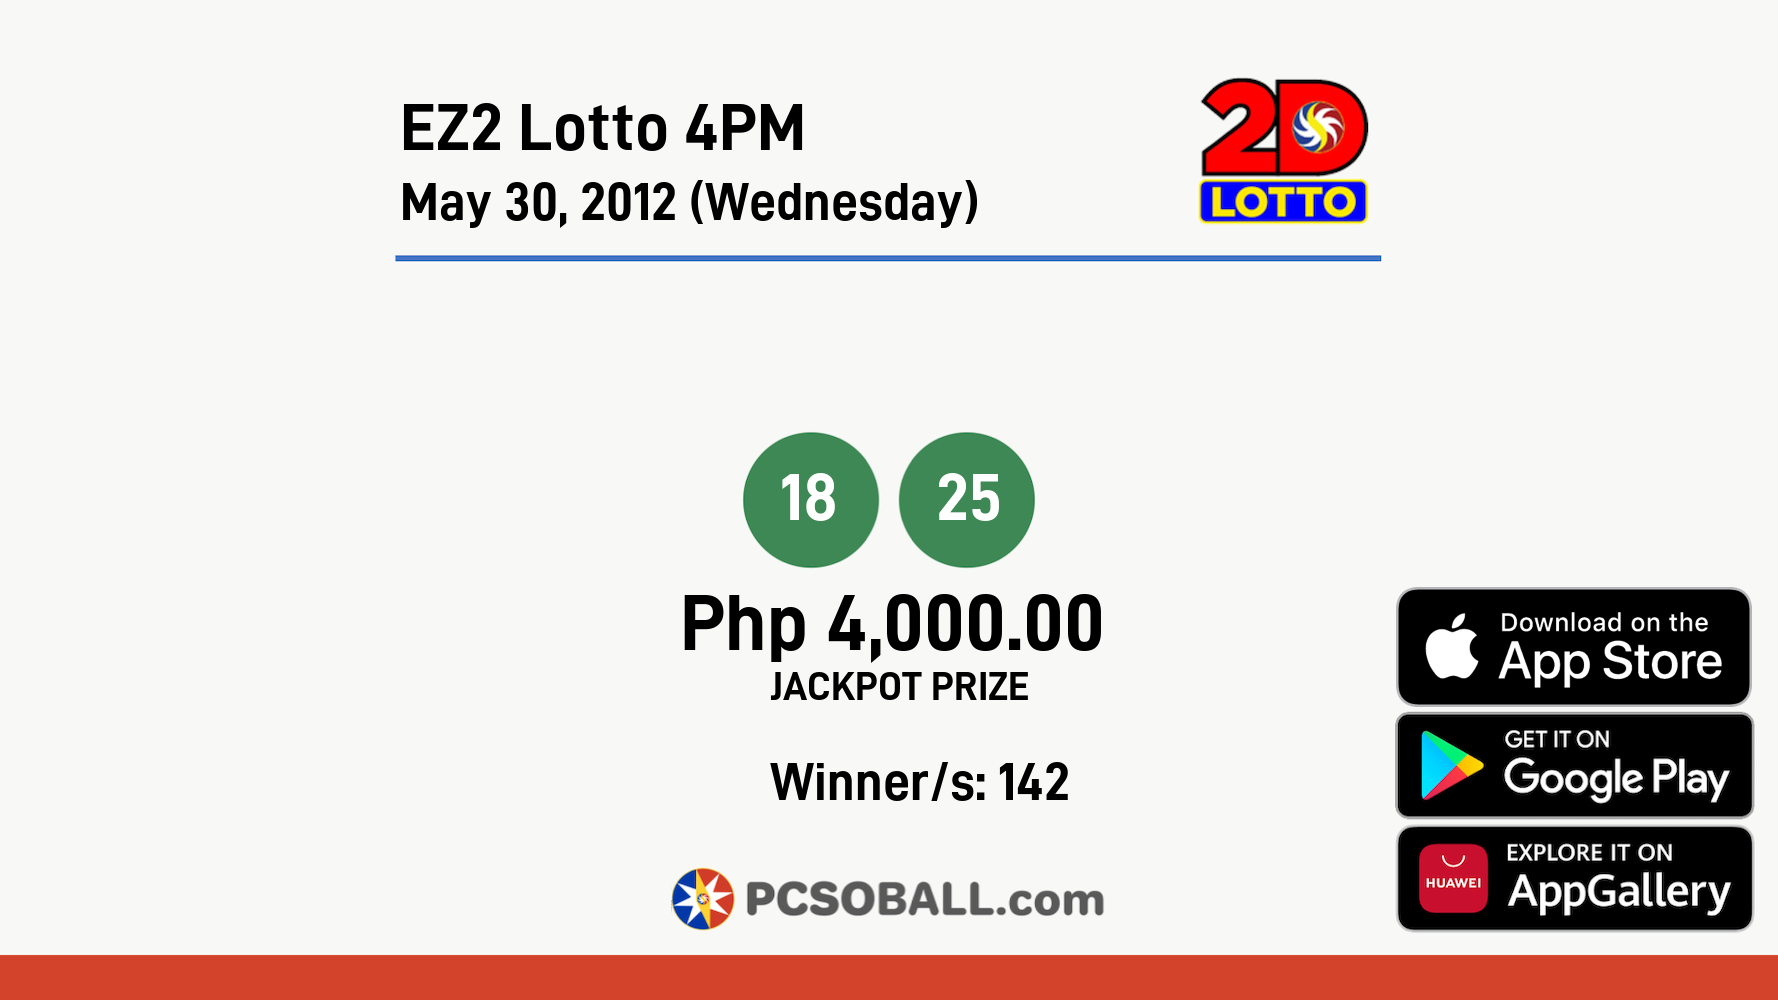 EZ2 Lotto 4PM May 30, 2012 (Wednesday) Result